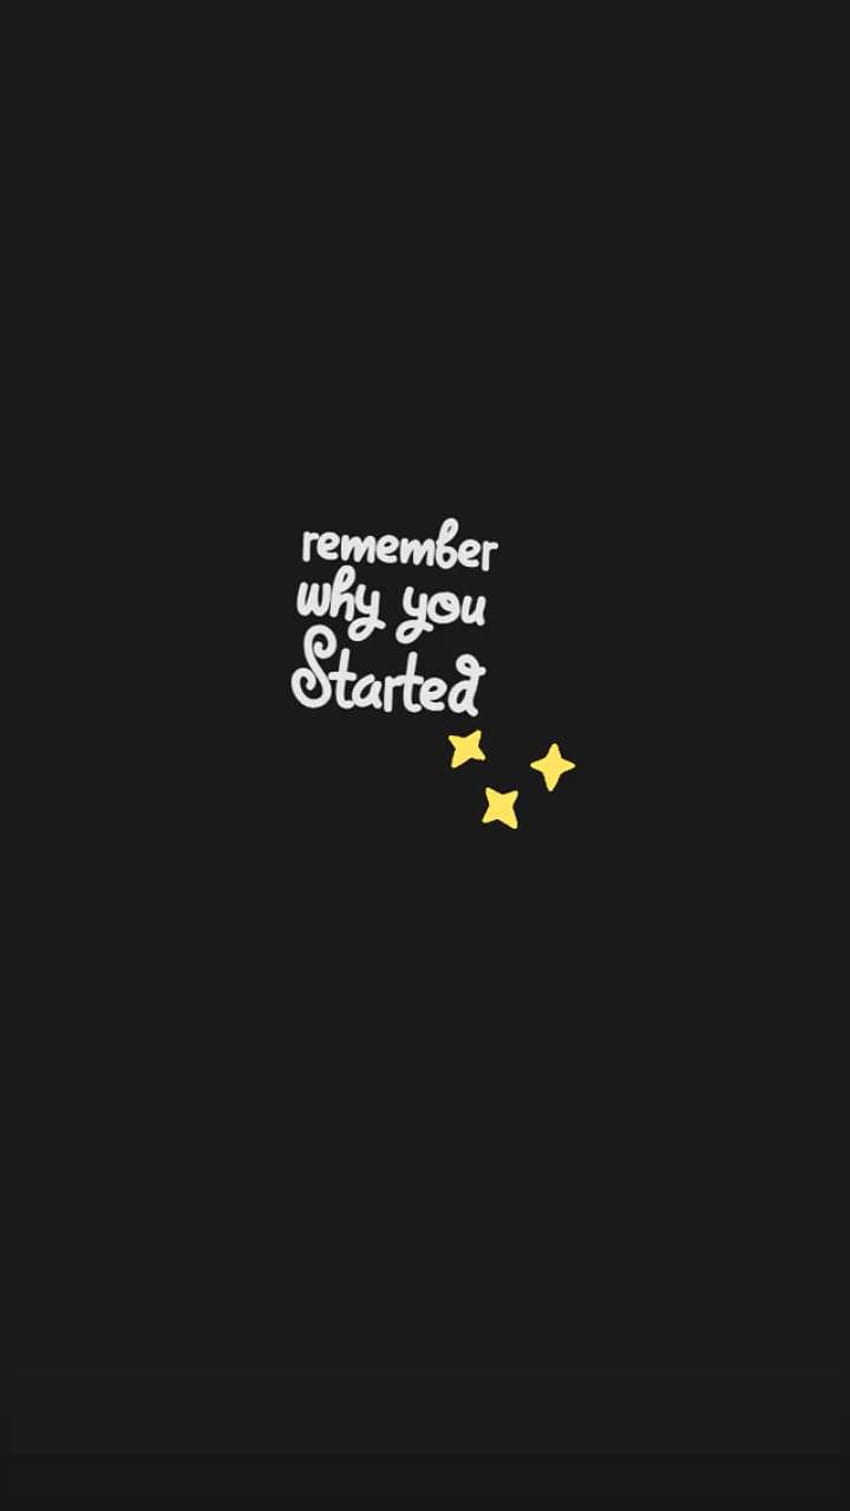 Phone Wallpaper Quotes Remember why you started  Remember why you started  Phone wallpaper quotes Quotes